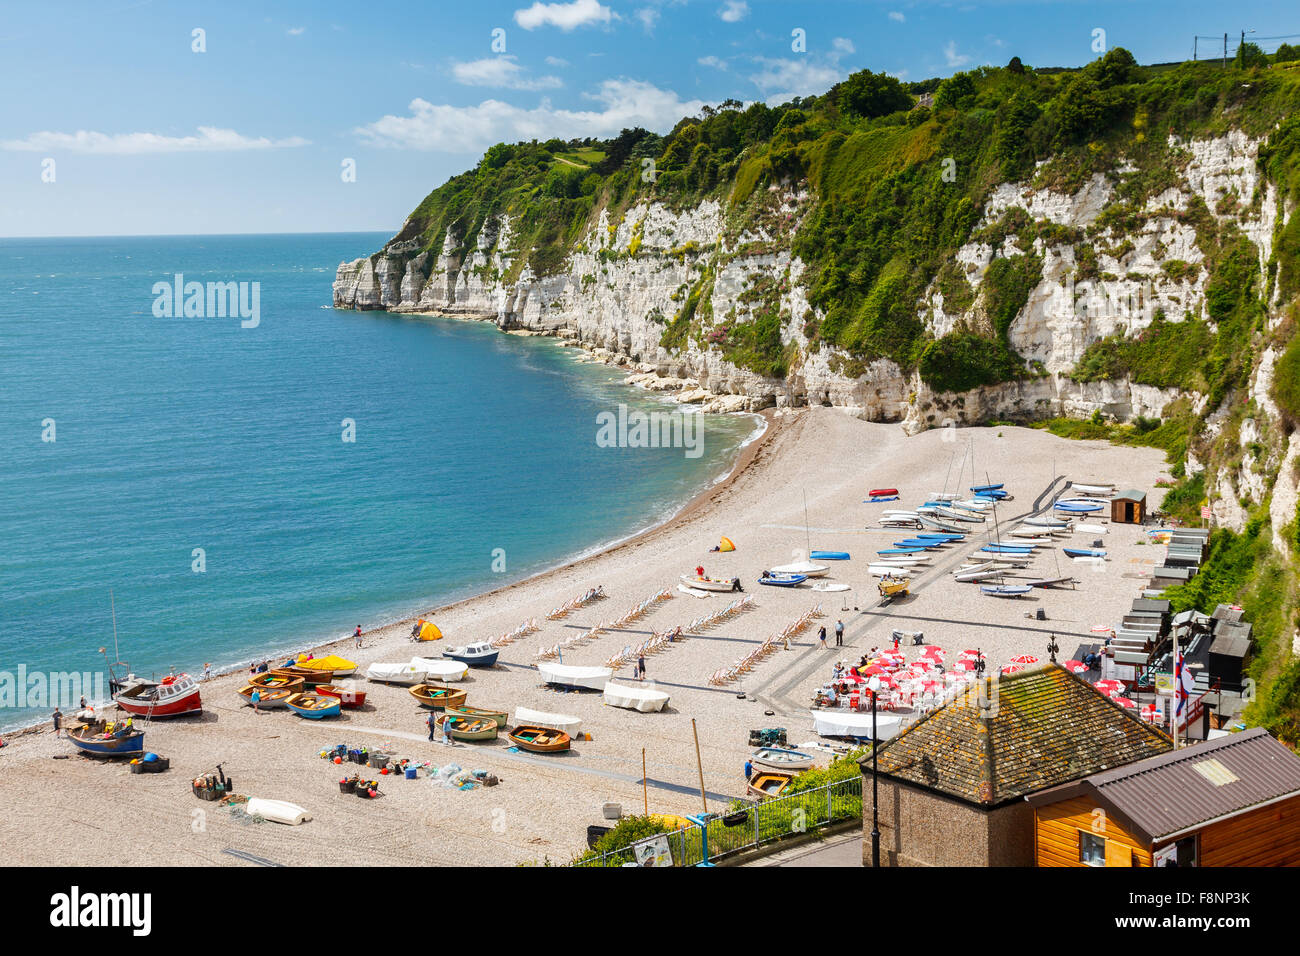 Overlooking the beach and cliffs at Beer in Lyme Bay Devon England UK Europe Stock Photo